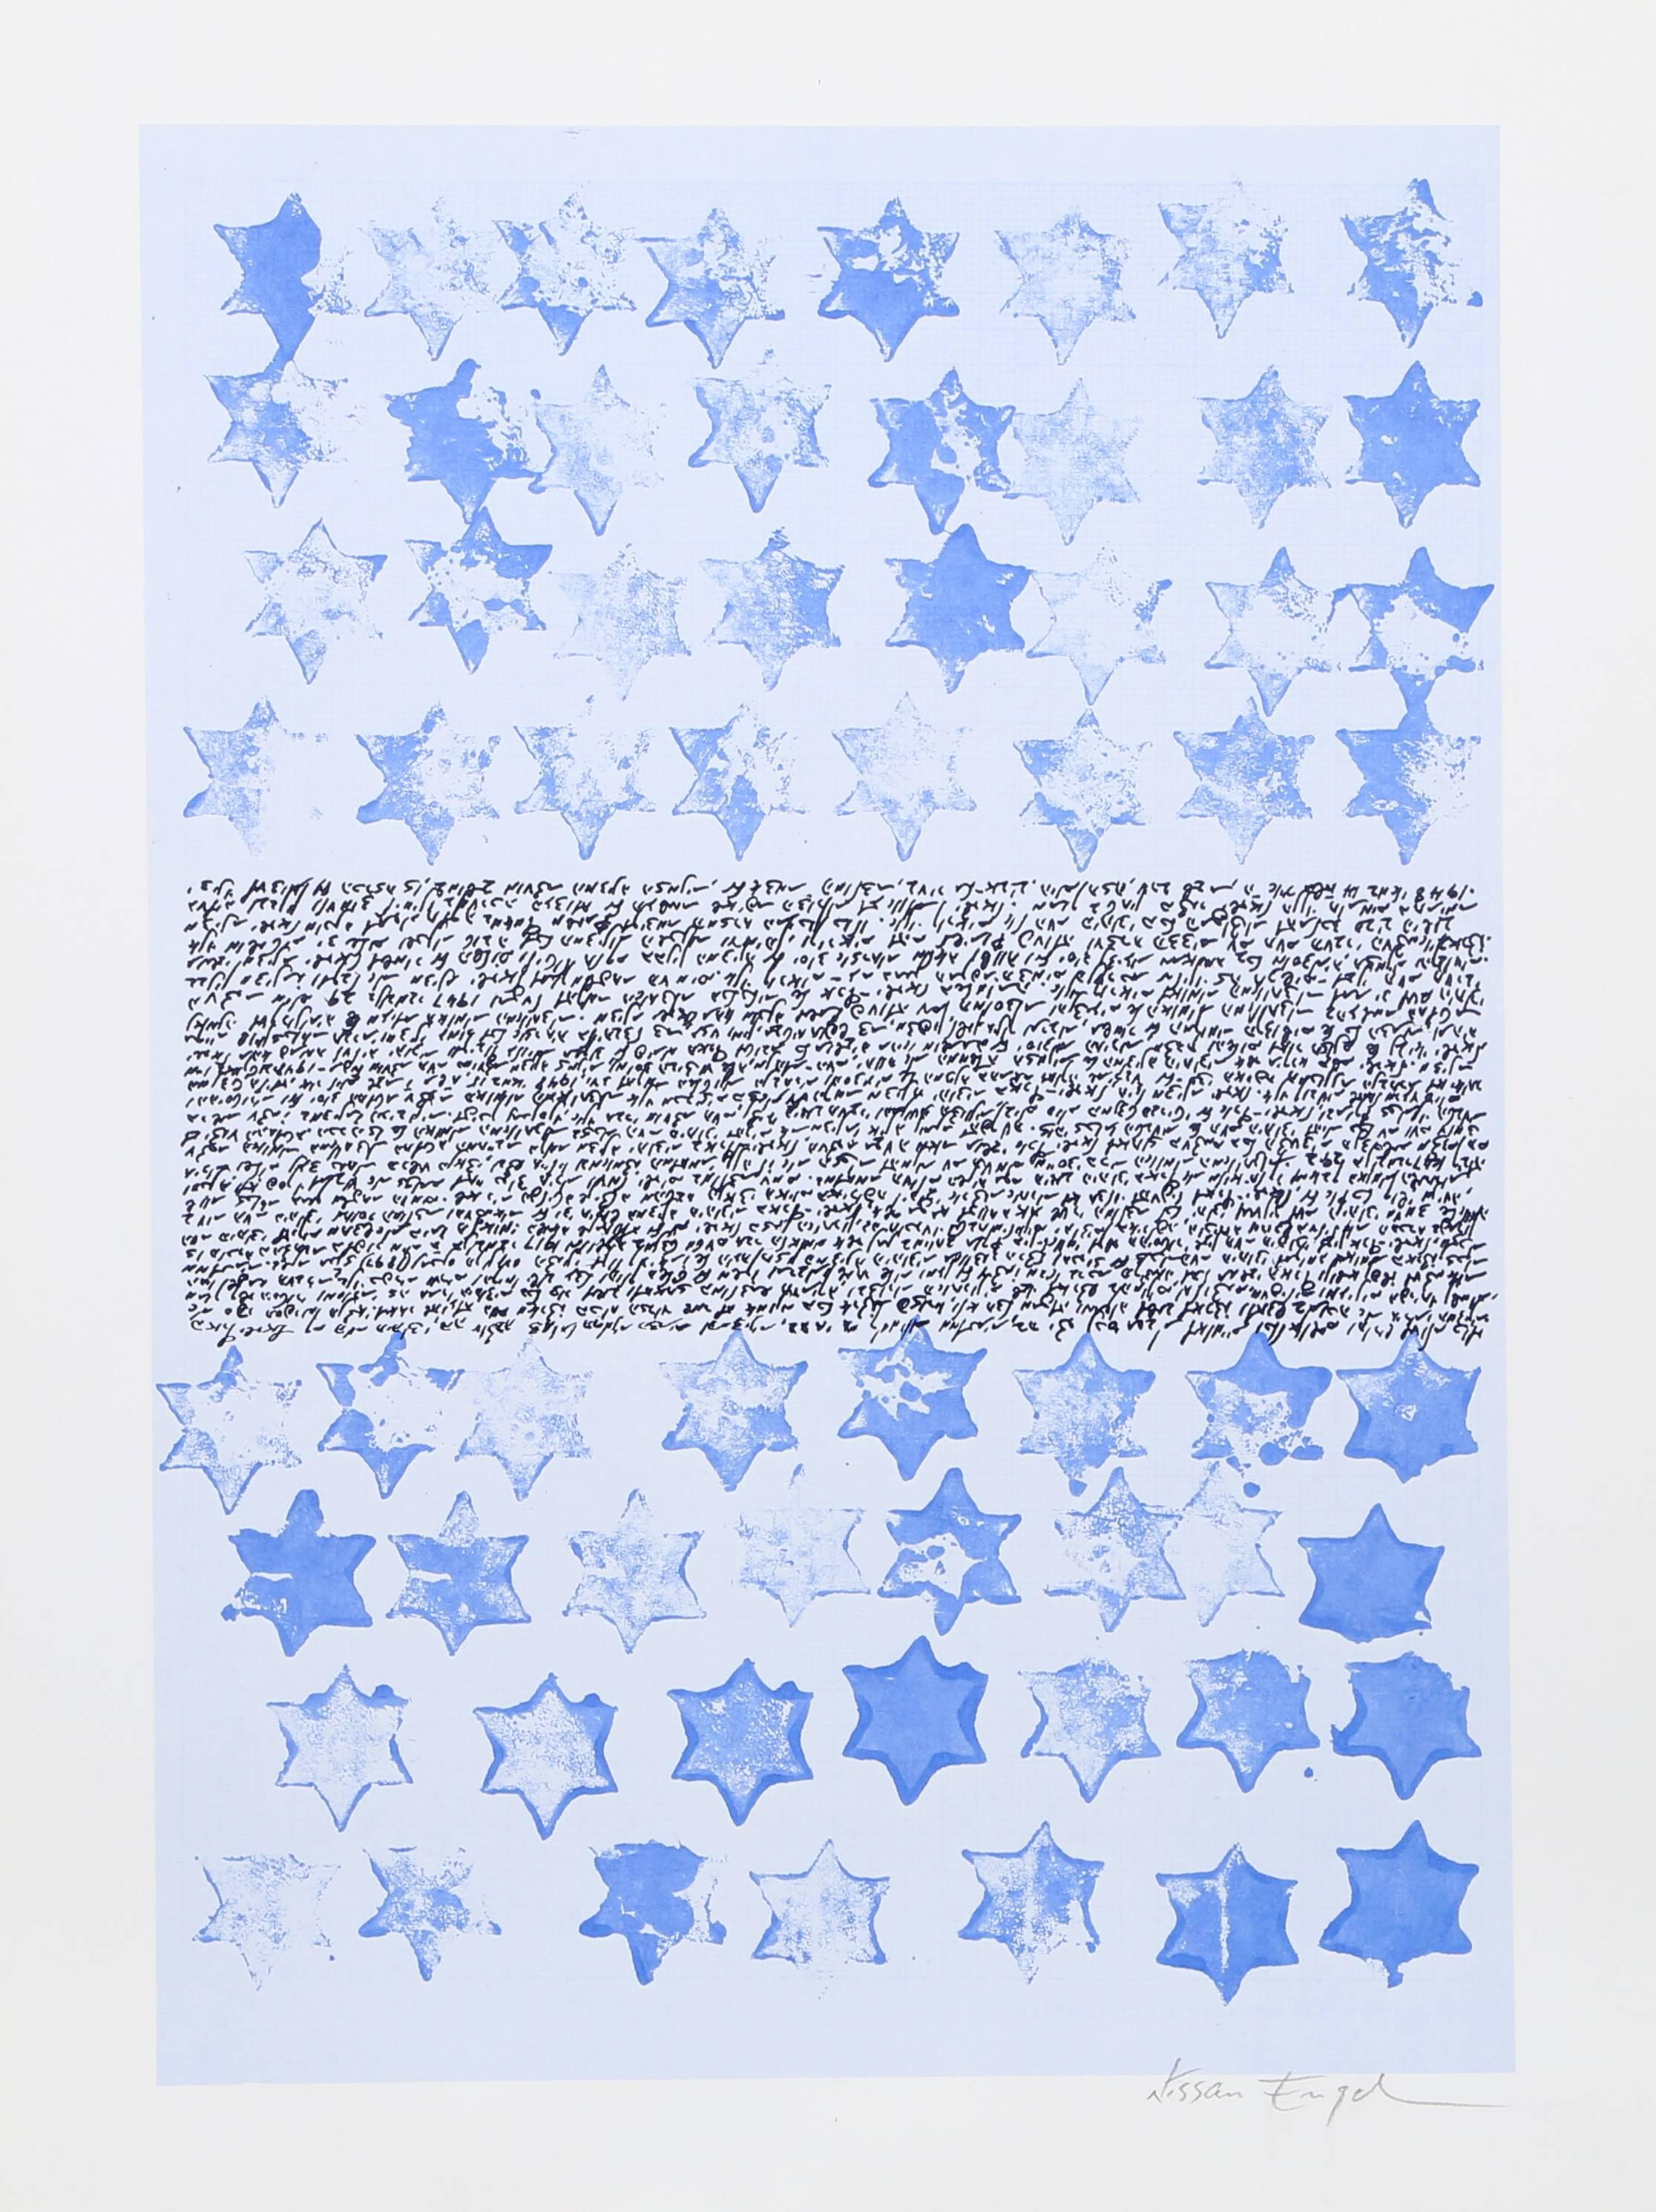 Artist: Nissan Engel, Israeli (1931 - )
Title: Star of David
Medium: Silkscreen, signed in pencil
Image Size: 21 x 15 inches 
Size: 28 x 18.5 in. (71.12 x 46.99 cm)